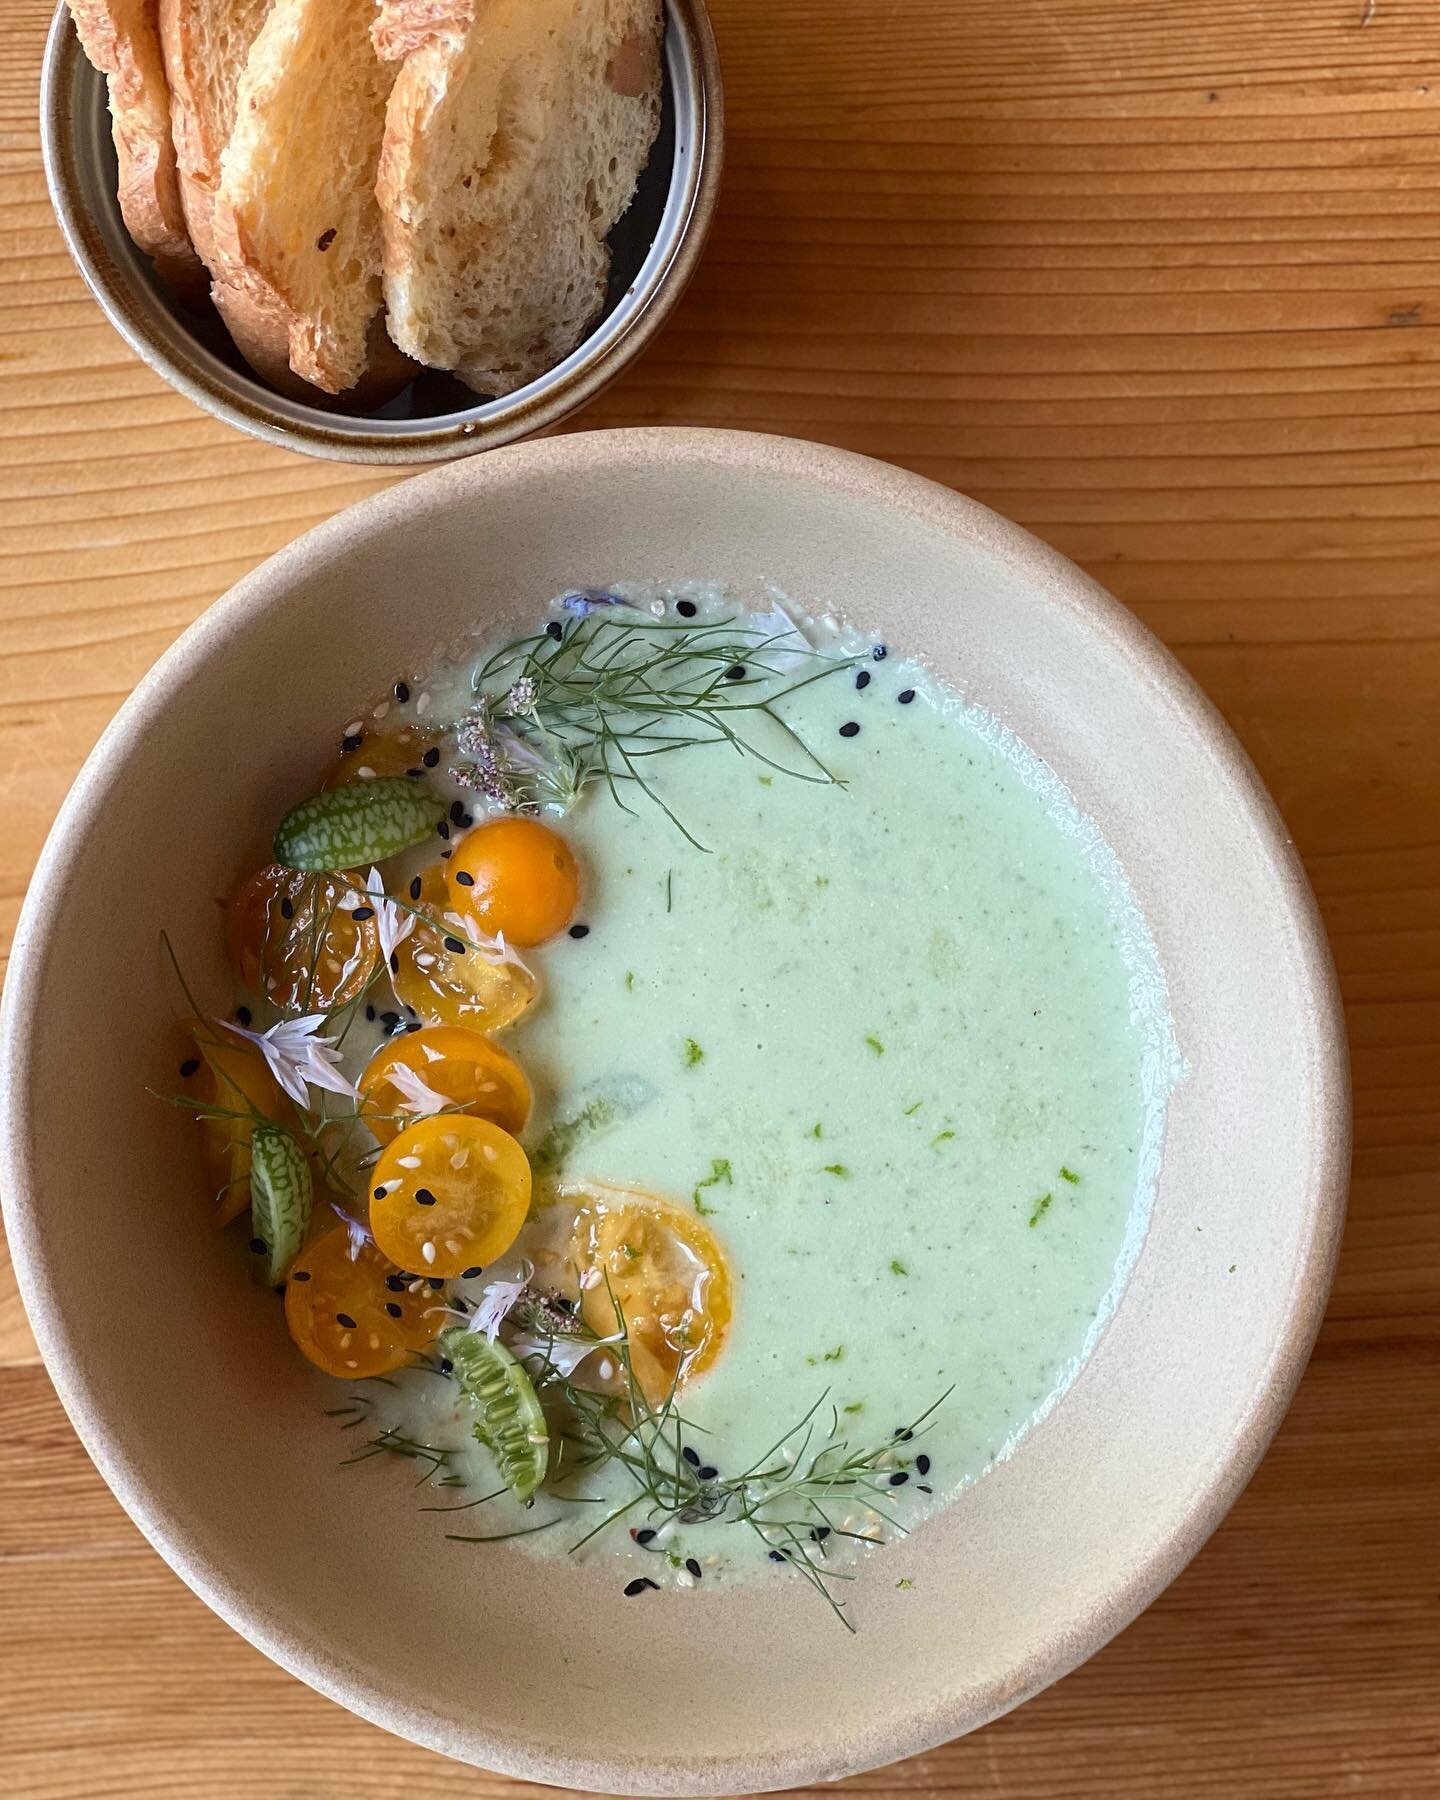 Cool as a cucumber! Cucumber gazpacho made with 2 varieties of cucumbers, thickened with greek yogurt and sesame seeds, brightened with musarat limes, umamied with kombu, topped with marinated tomatoes and cucamelons. All organic produce picked by yo